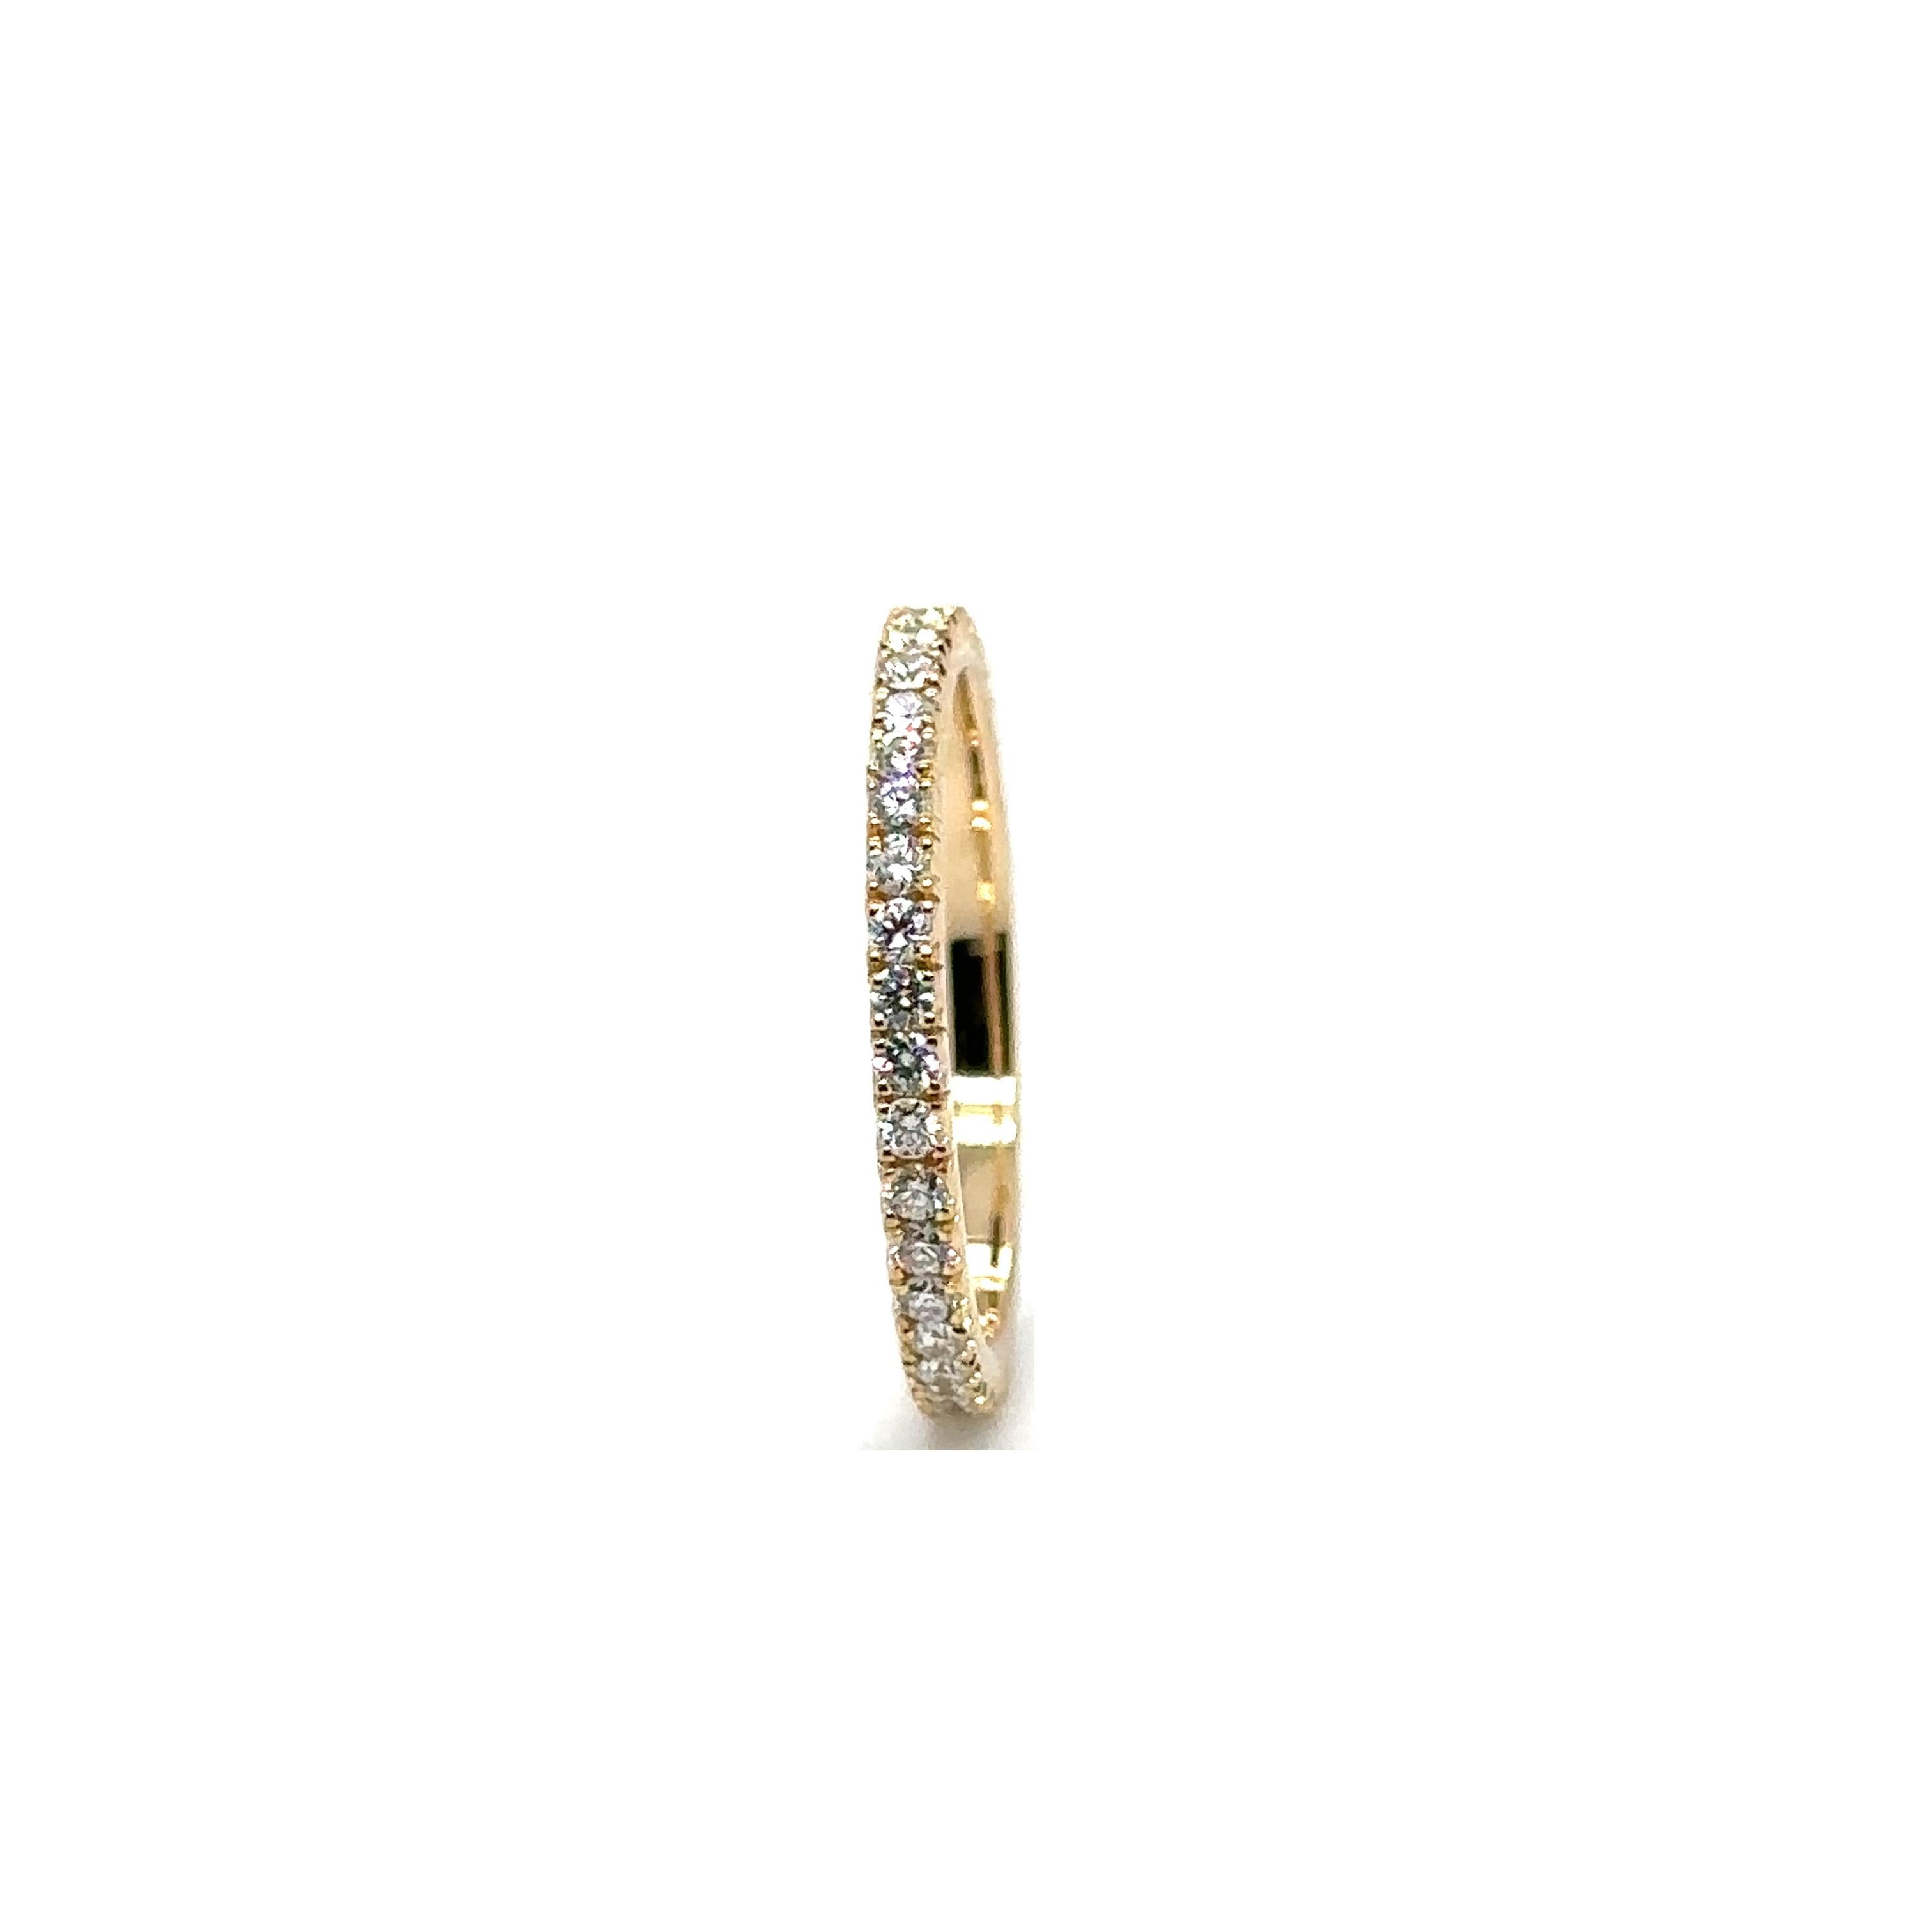 Modern WB-39 18 KY - 18KY WEDDING BAND with 0.52 CWT DIAMONDS For Sale